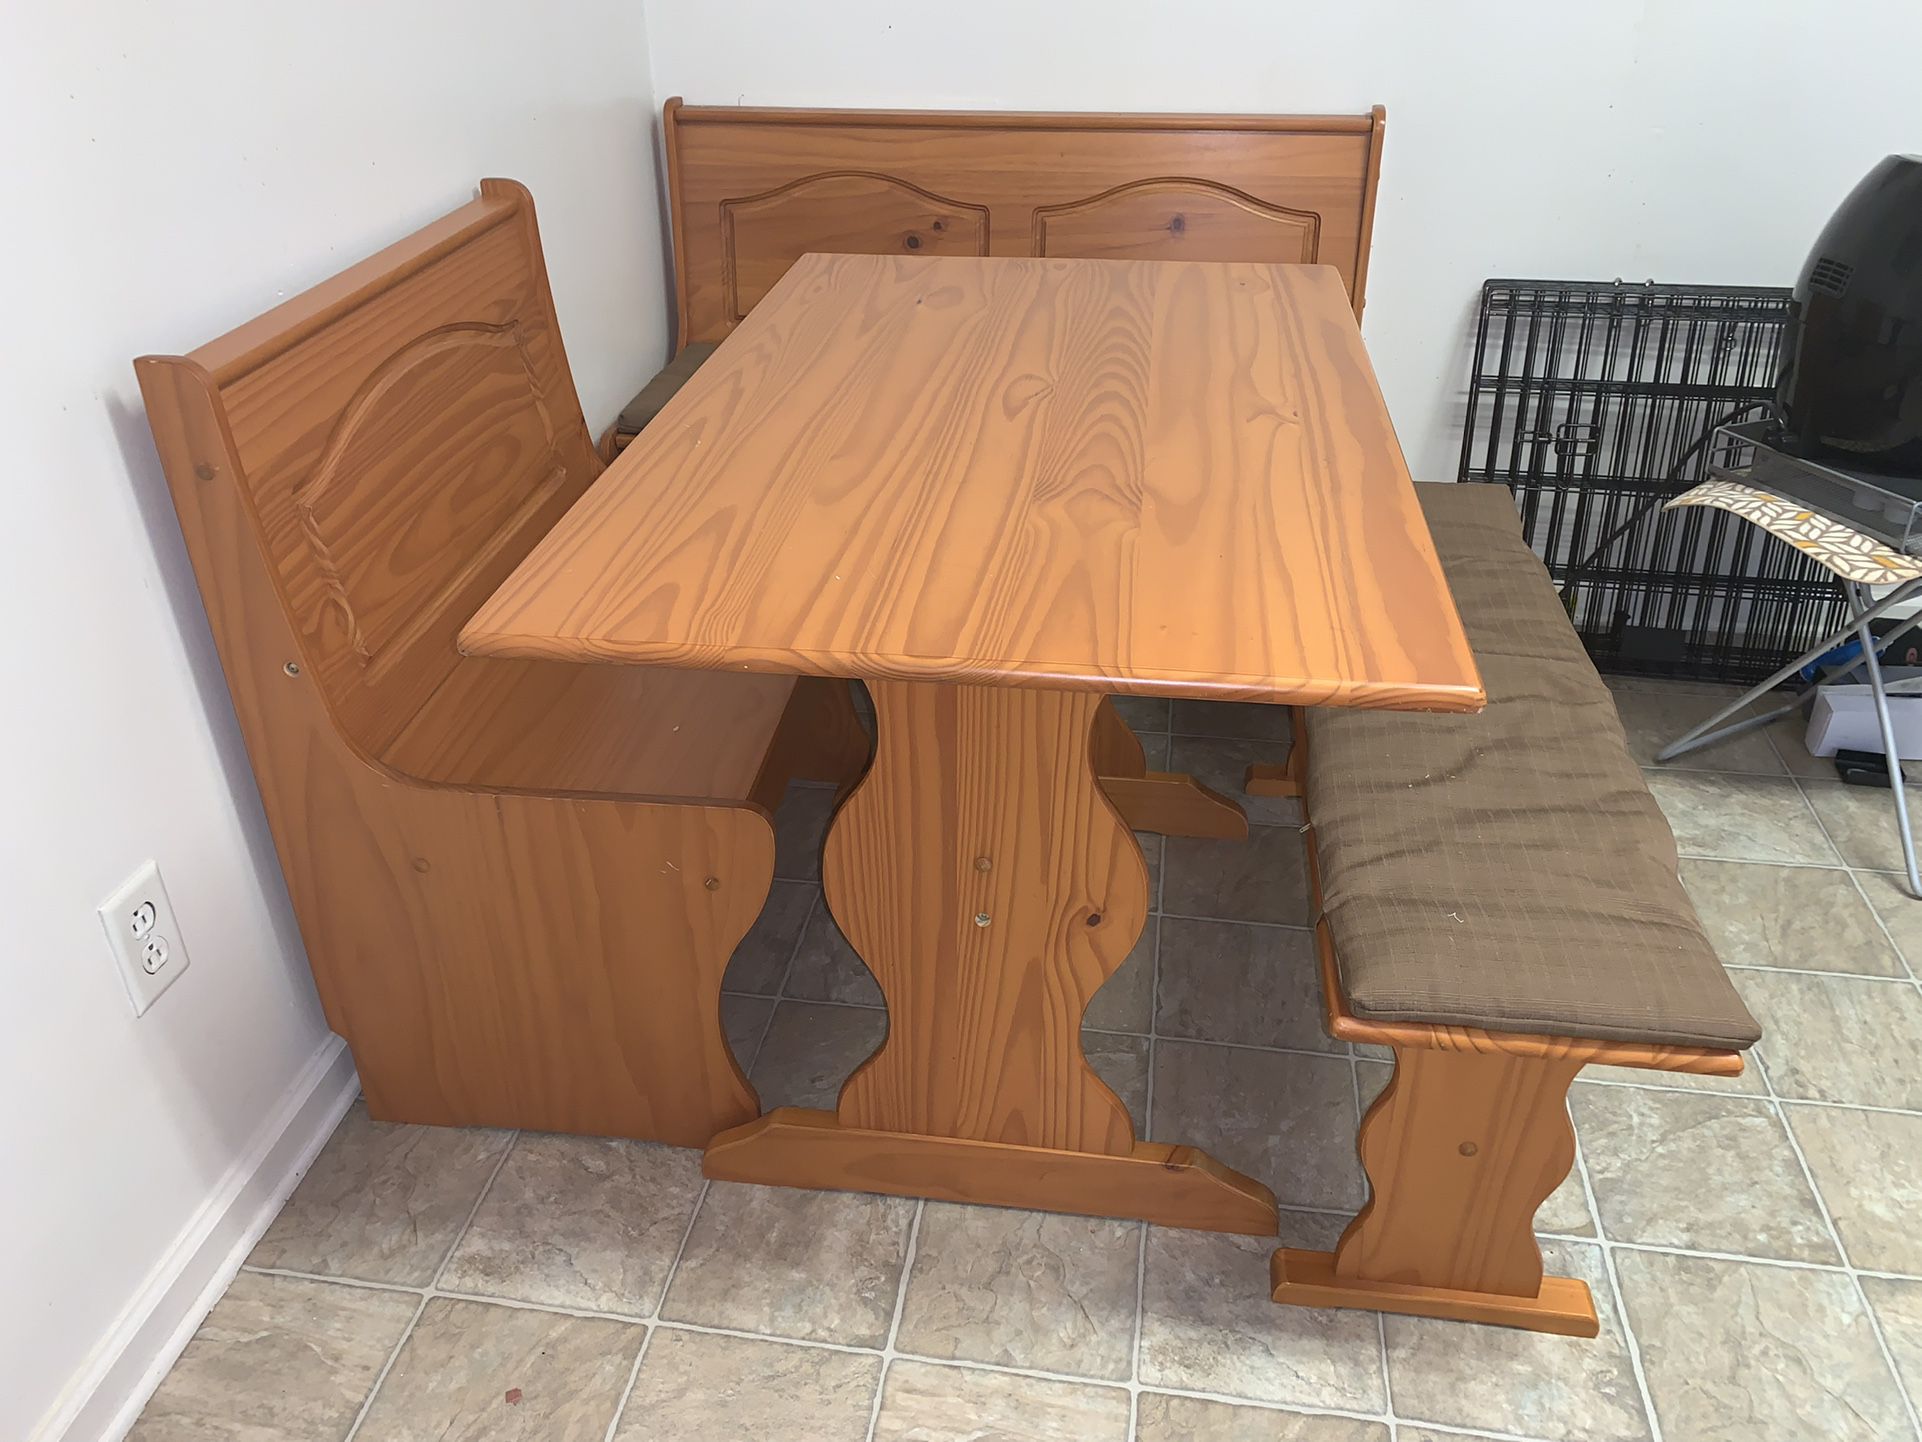  **$60** Dining Room Set Corner Table With Benches And Storage Space 